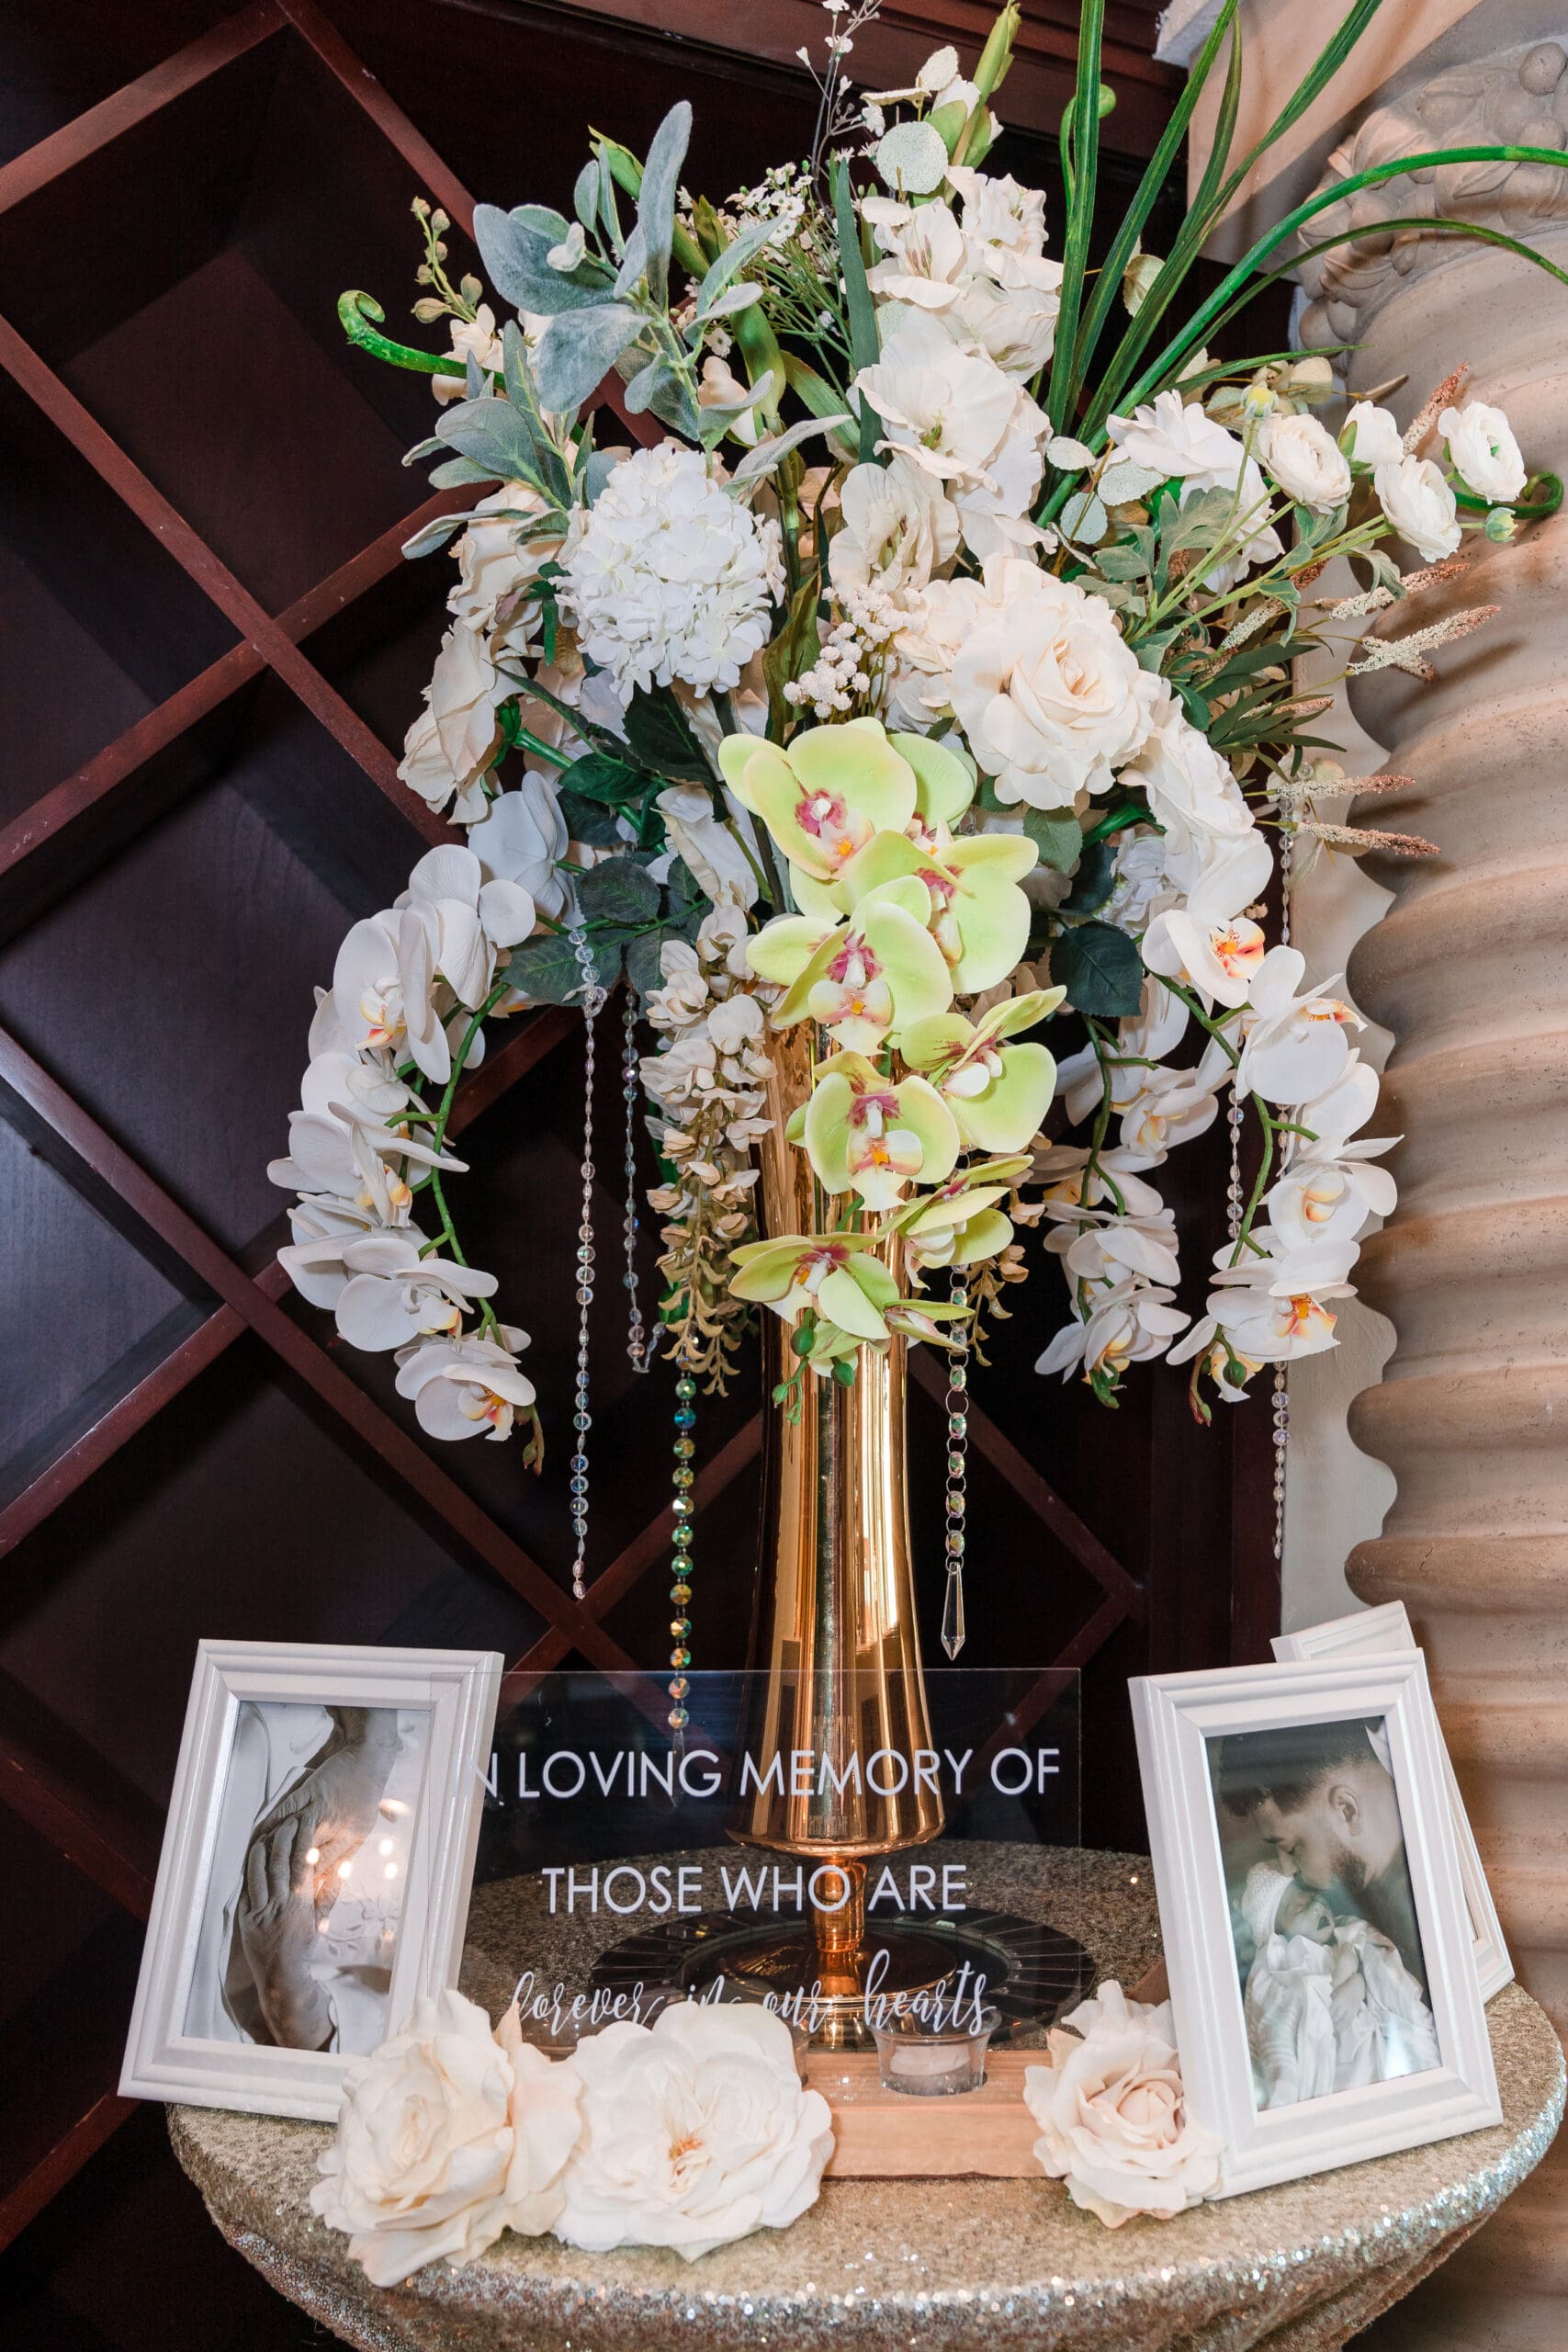 Photo showing flowers and photos with the words "In Loving Memory Of Those Who Are Here in our hearts" to commemorate absent loved ones.